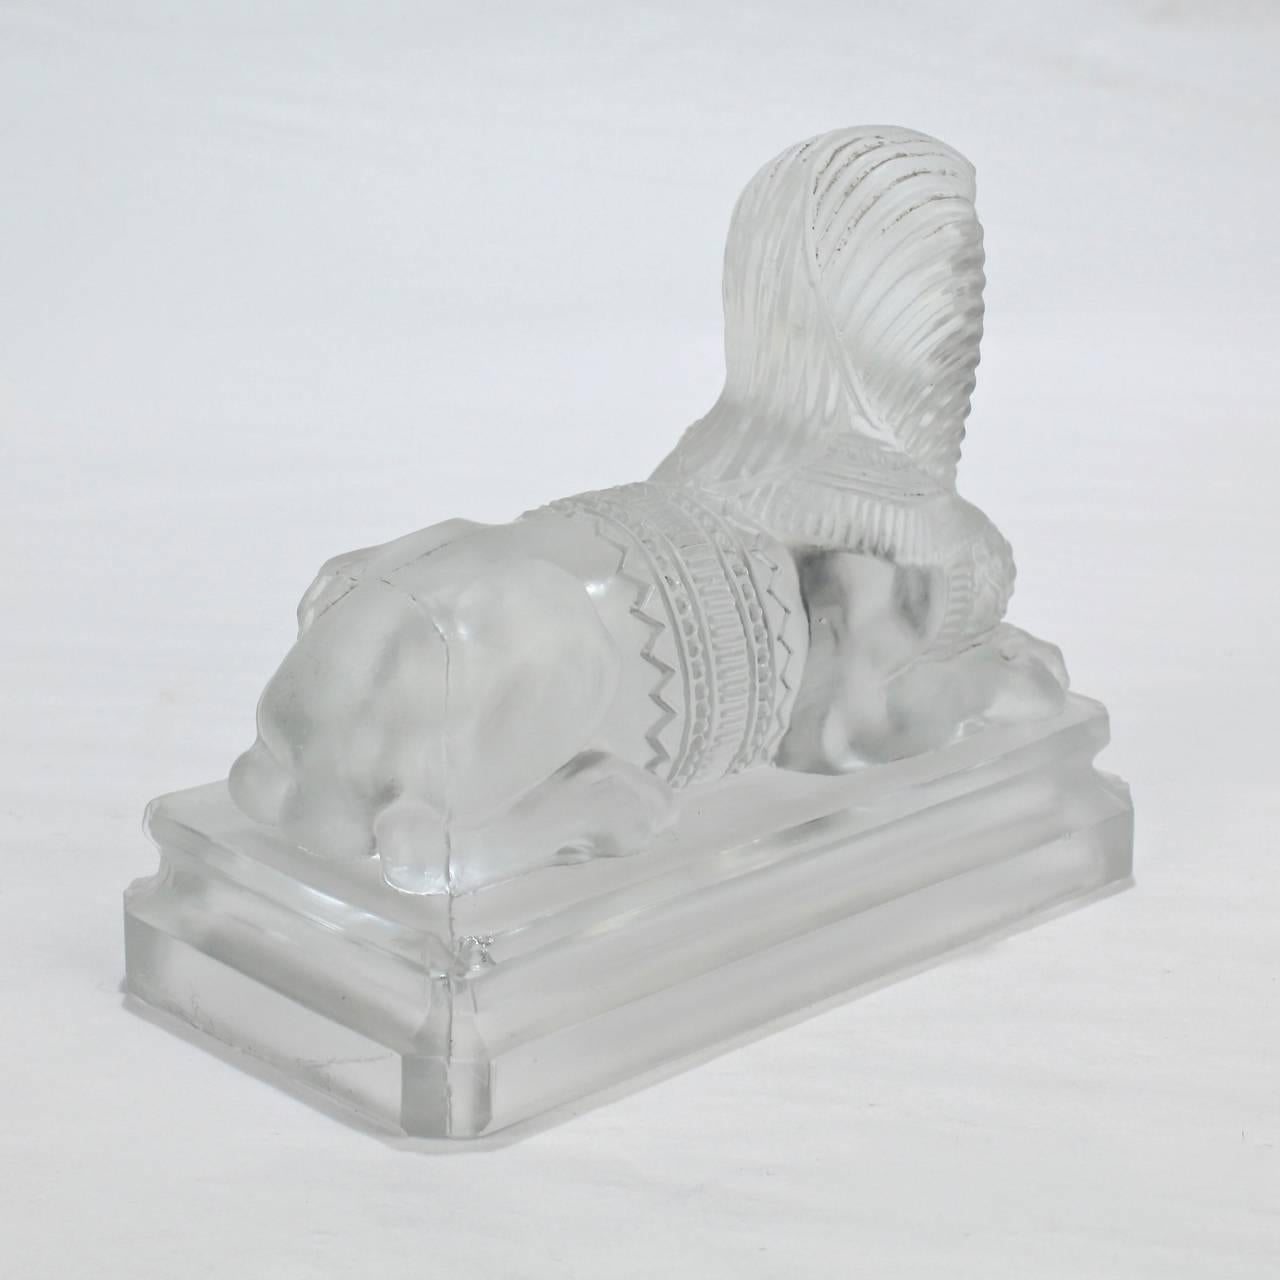 Antique French Egyptian Revival Frosted Glass Sphinx Paperweight by Saint Louis 1